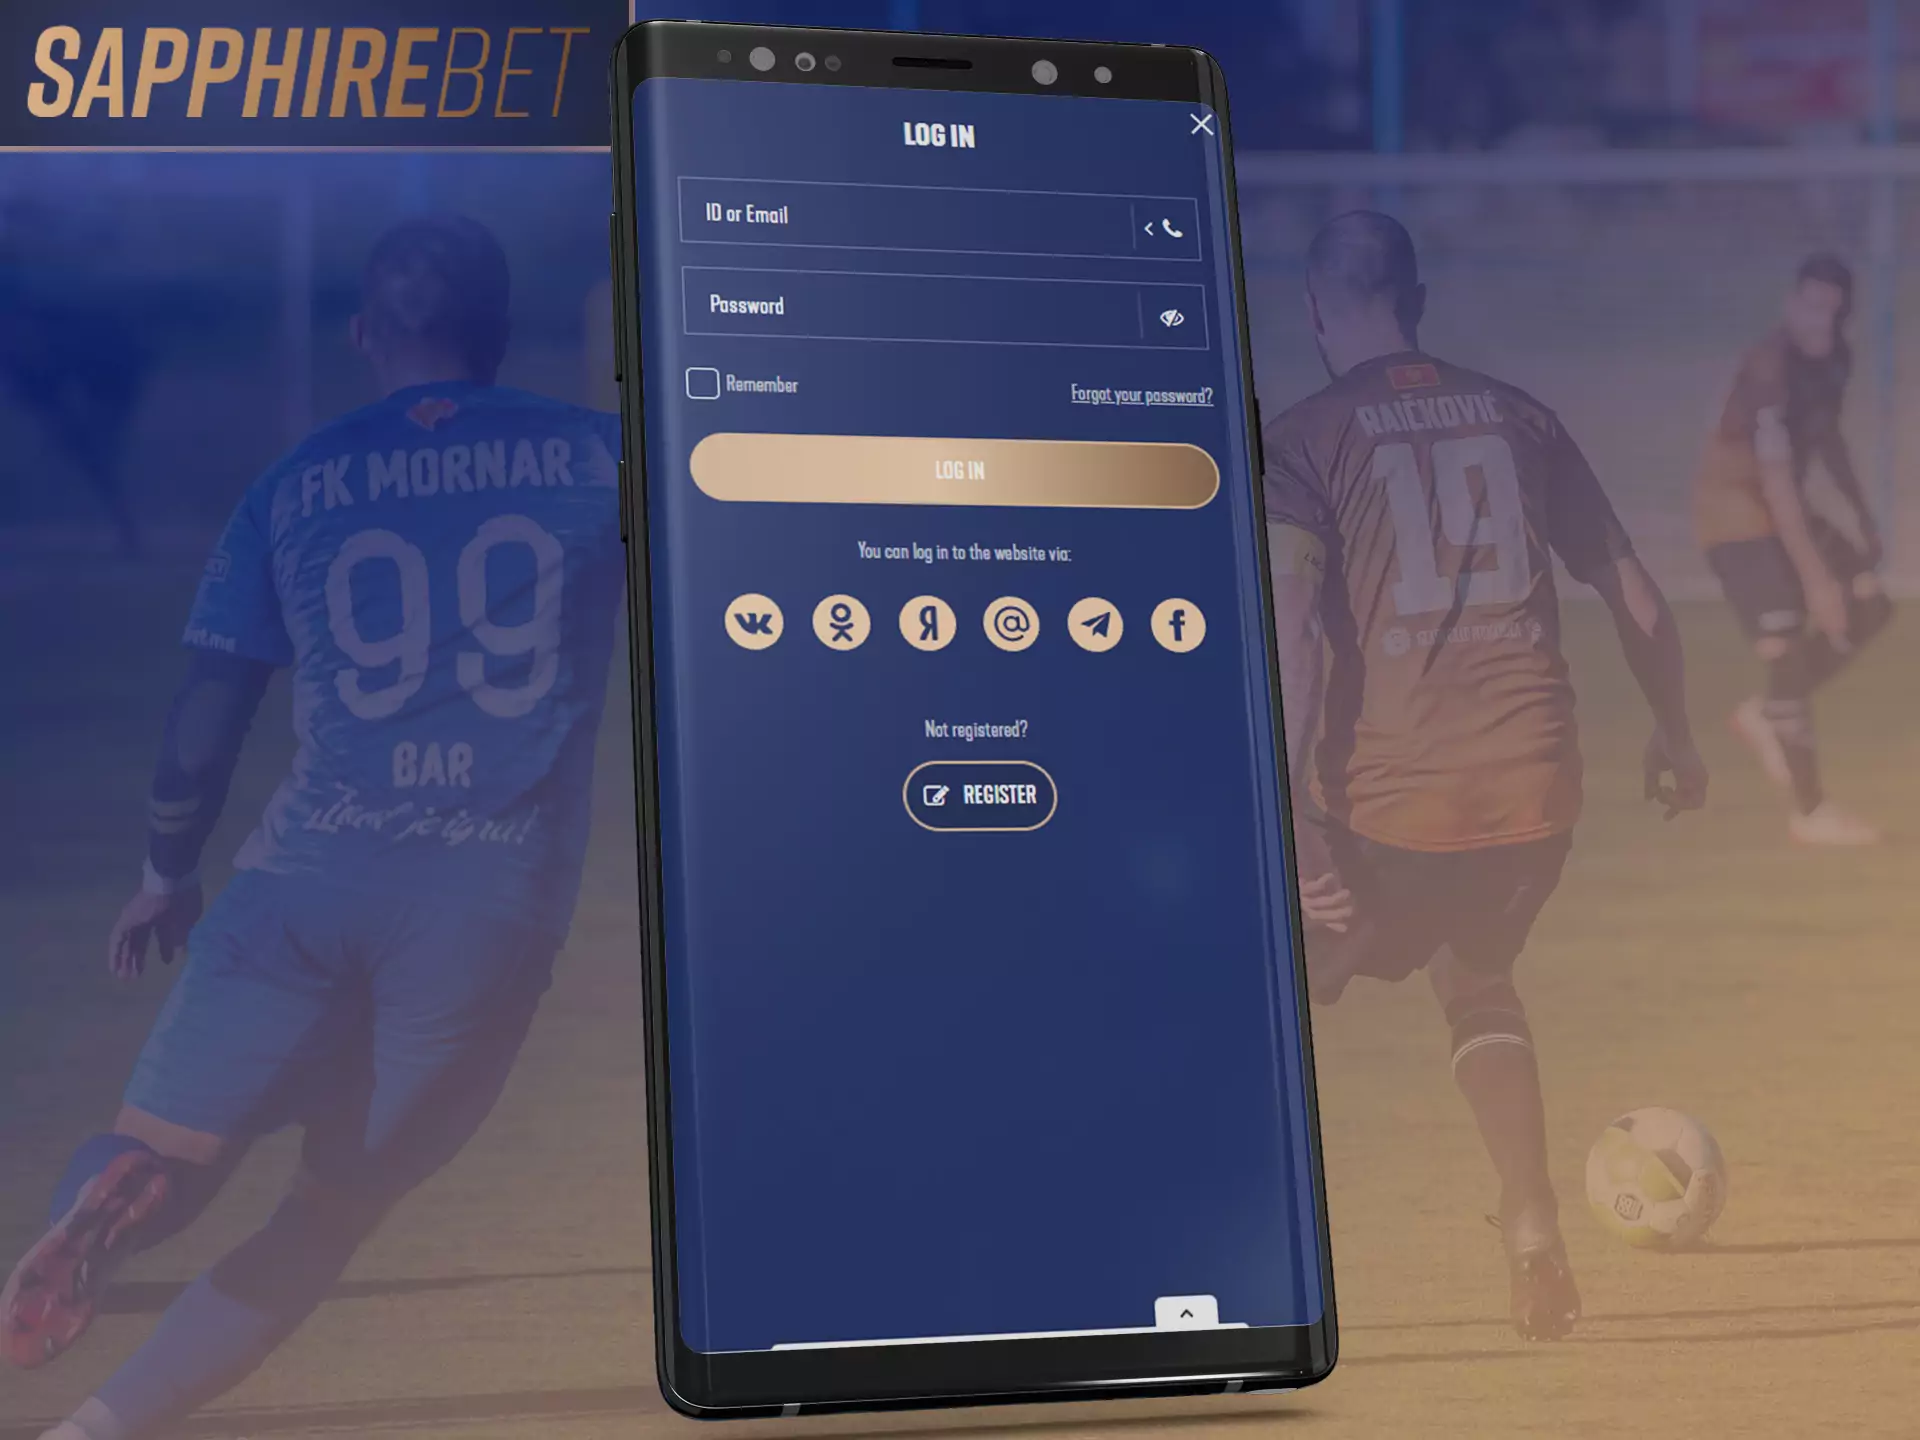 Log into your account in the Sapphirebet app, use bonuses and place bets.